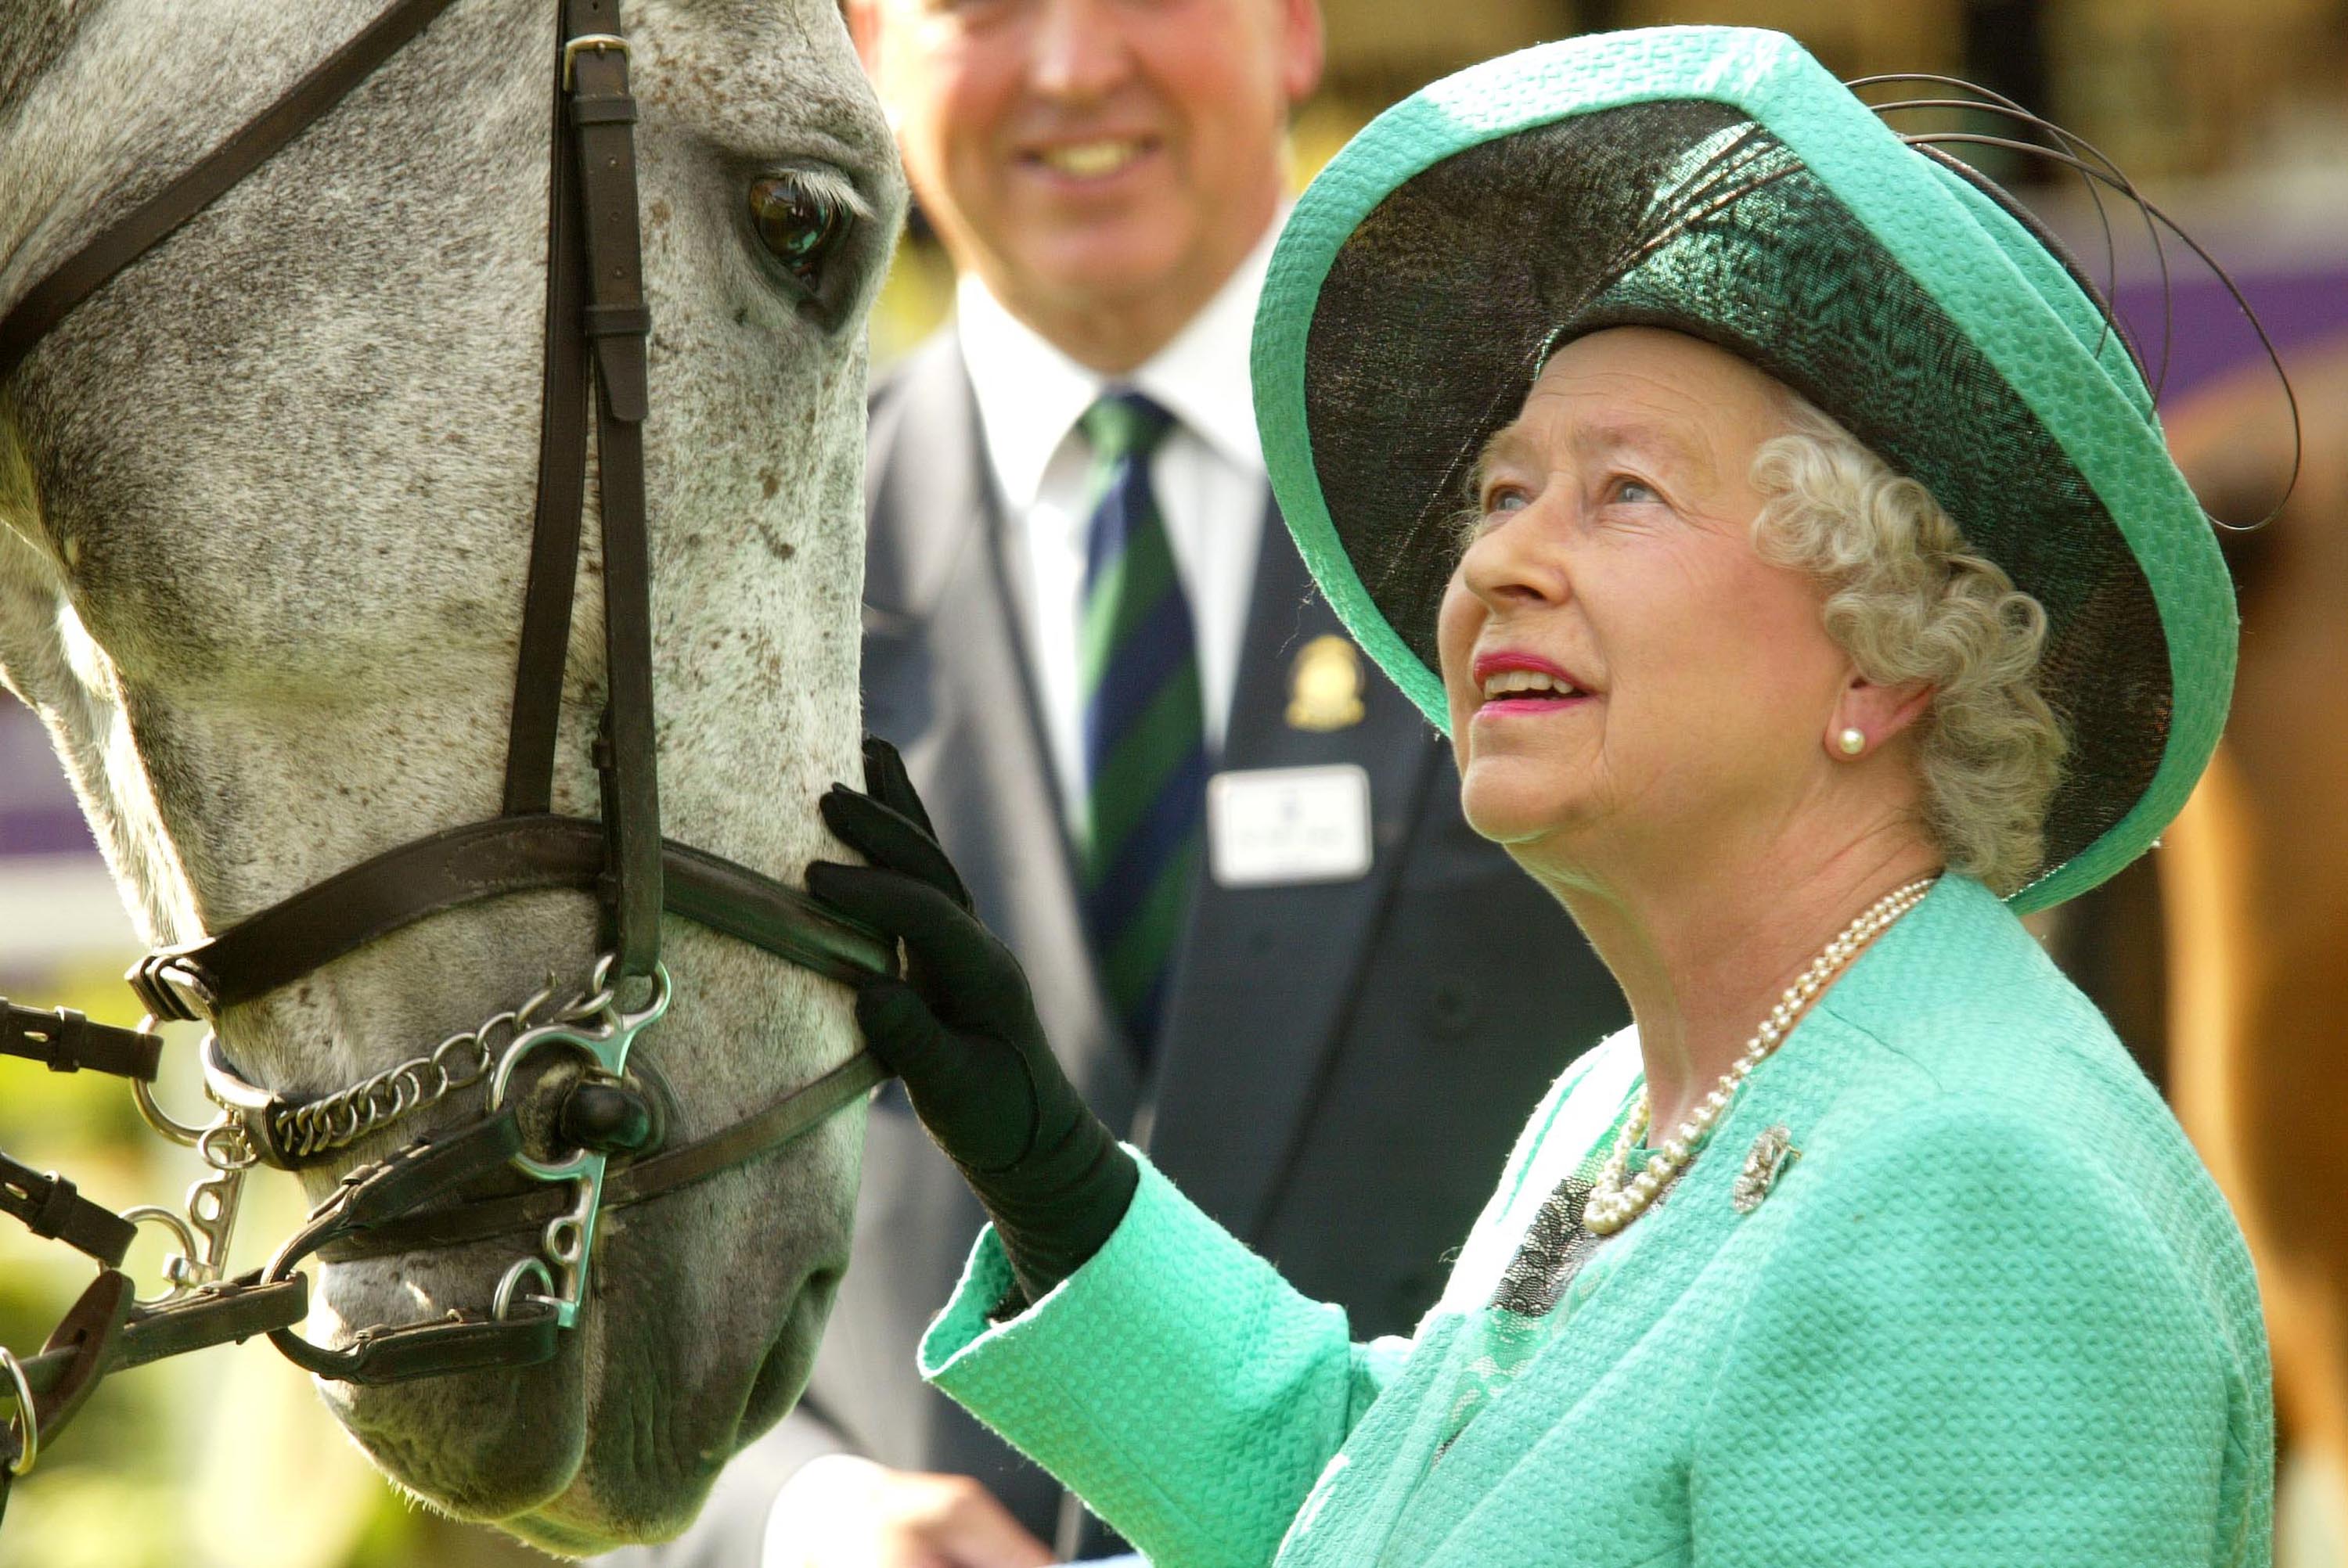 Queen Elizabeth II attends the third day of the Royal Windsor Horse Show at Home Park on 15 May 2004 in Windsor